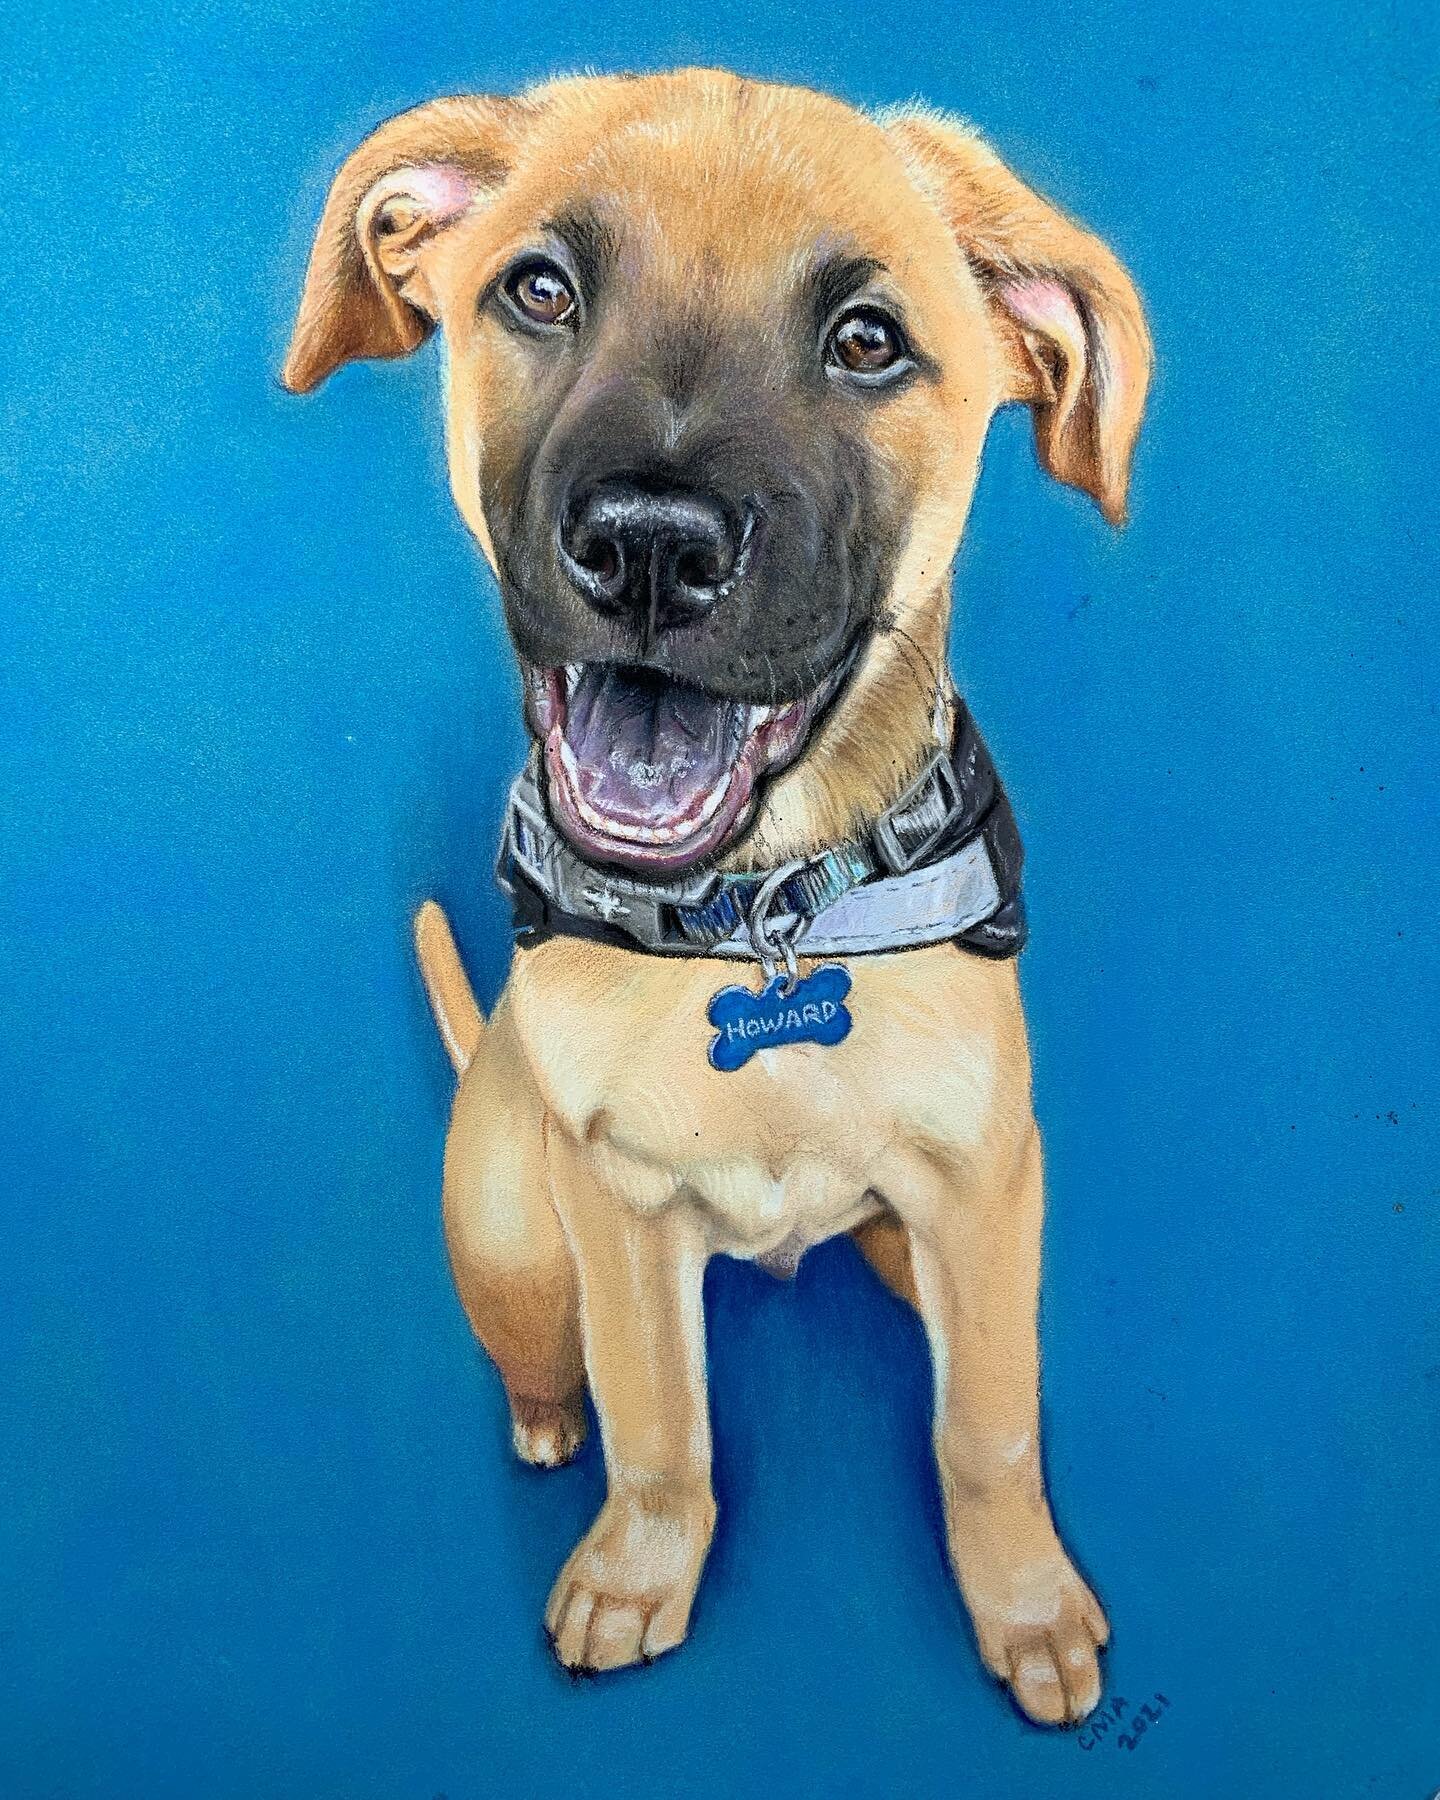 How cute is Howie? I tried experimenting with a colored background to match his name tag. What do you think?

Panpastels and pastel pencils (Caran d&rsquo;Ache, Derwent, Faber Castell, Stabilo) with Faber Castell soft pastel sticks for background on 